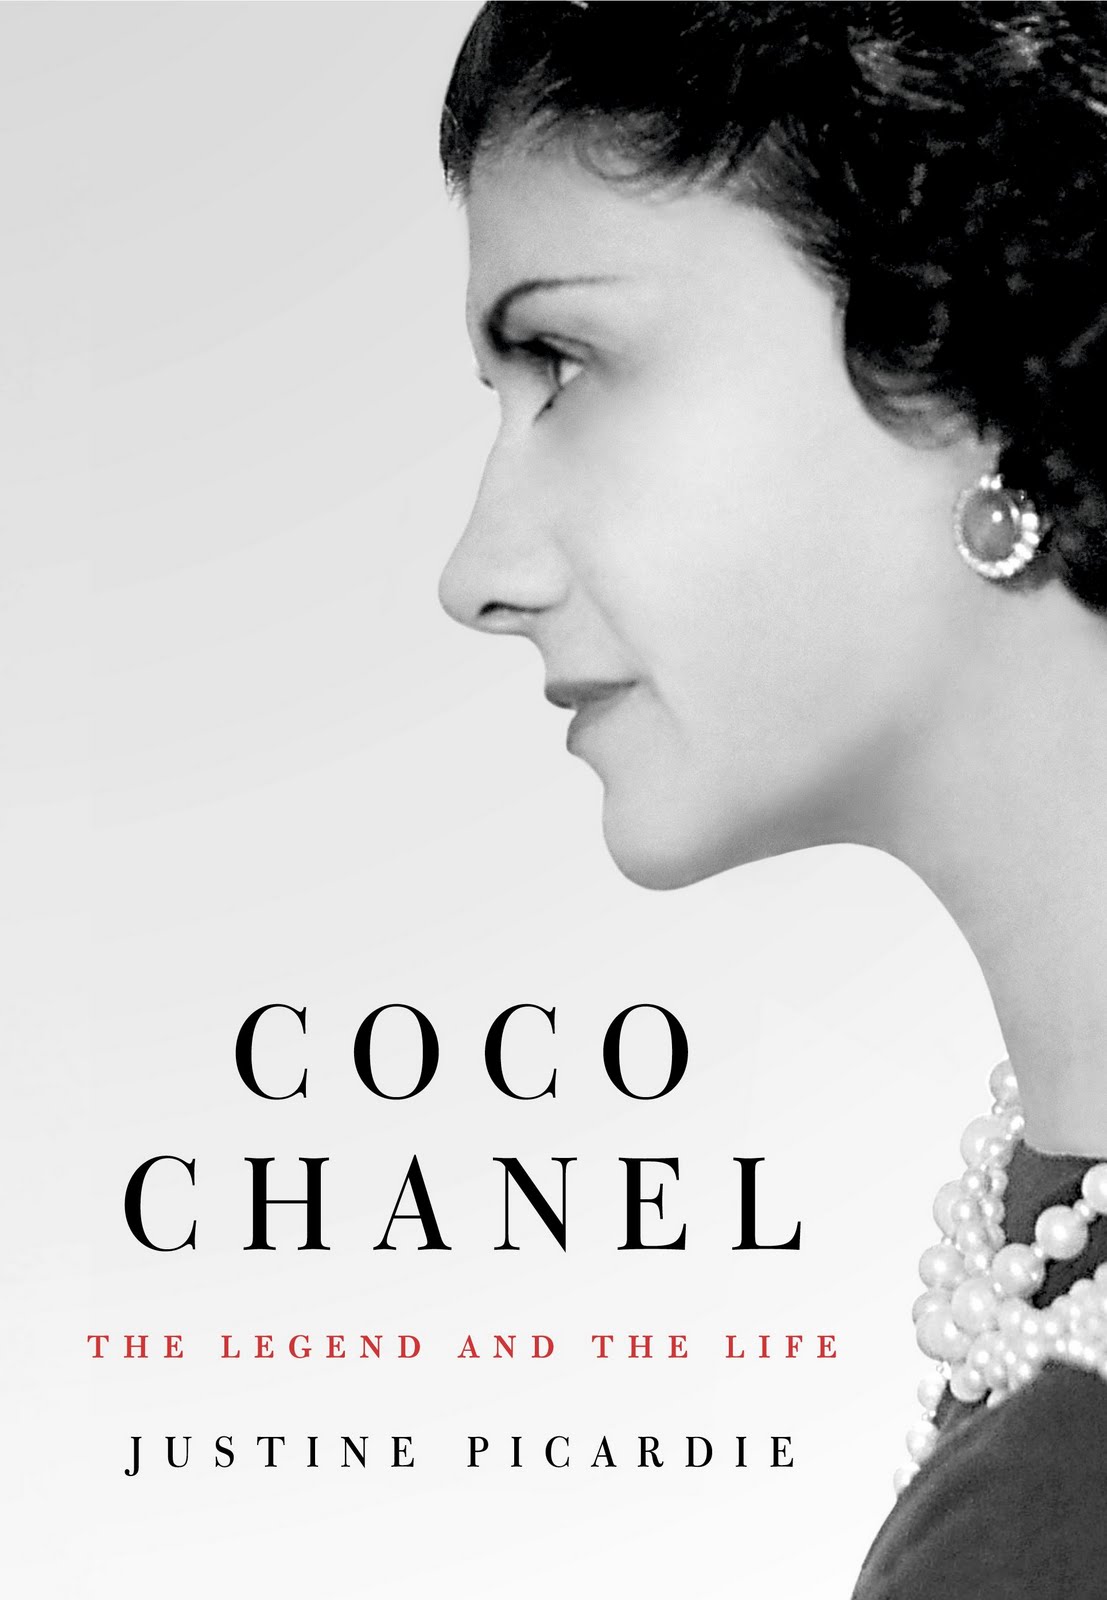 Chanel Coco Mademoiselle with Keira Knightley